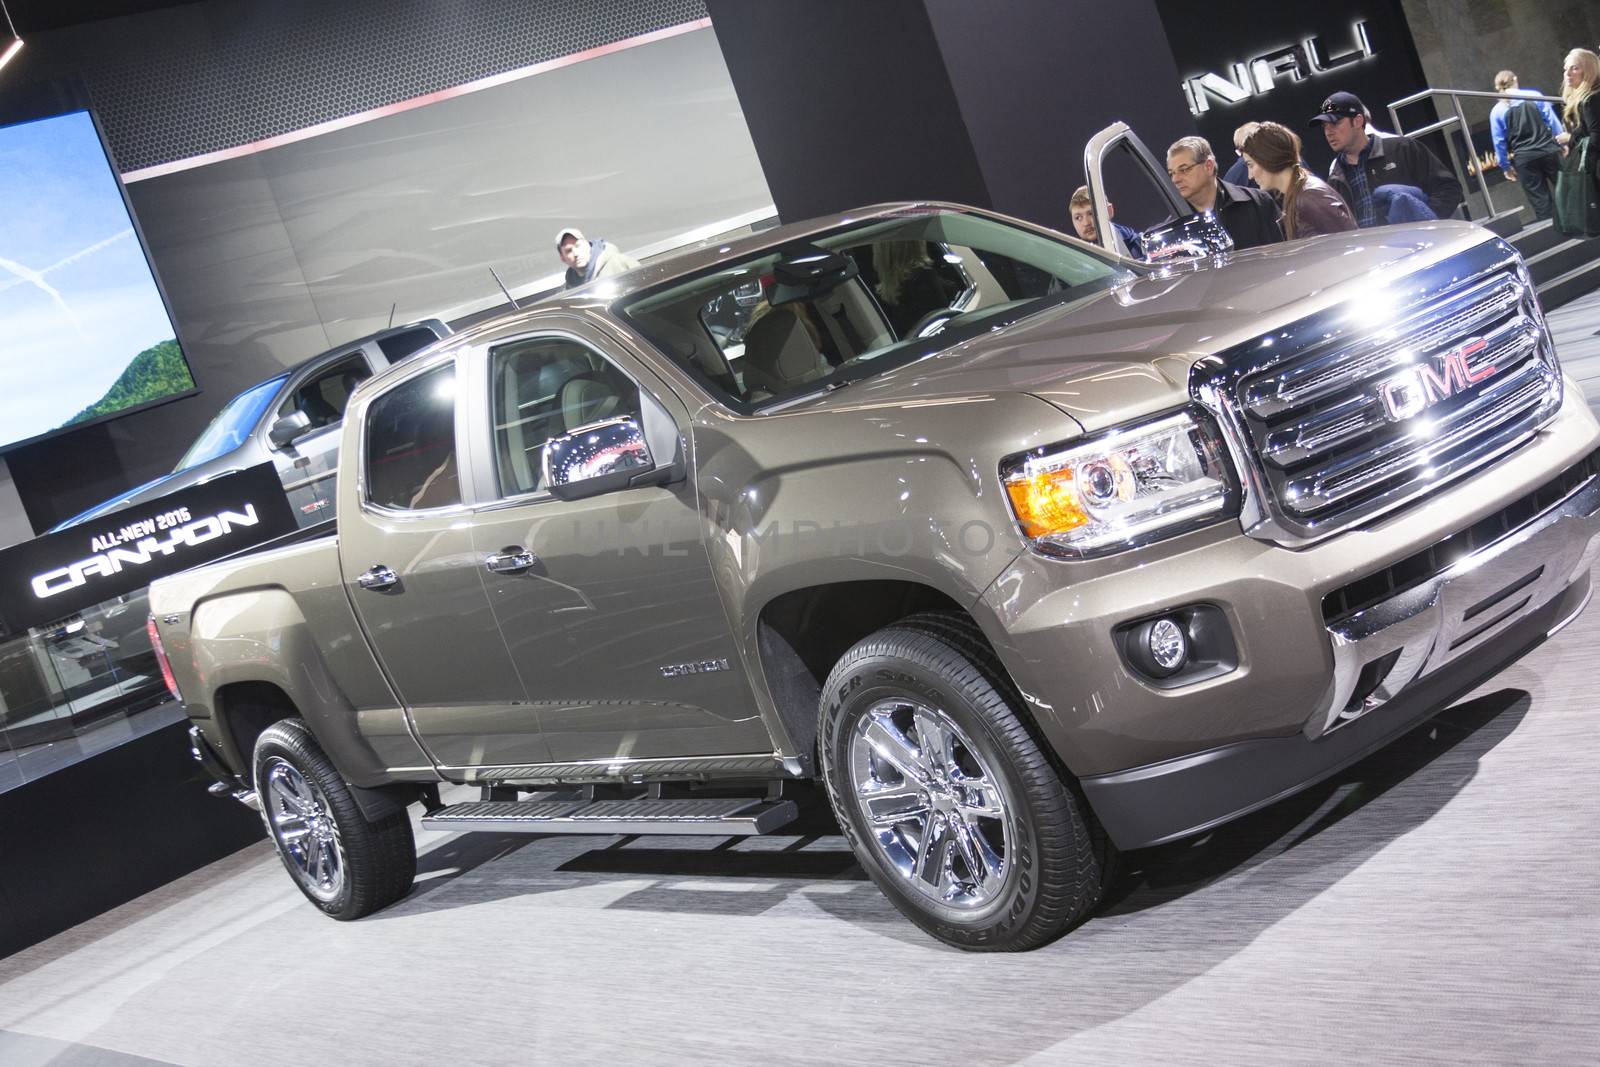 DETROIT - JANUARY 26 :The new 2015 GMC Canyon truck at The North by snokid